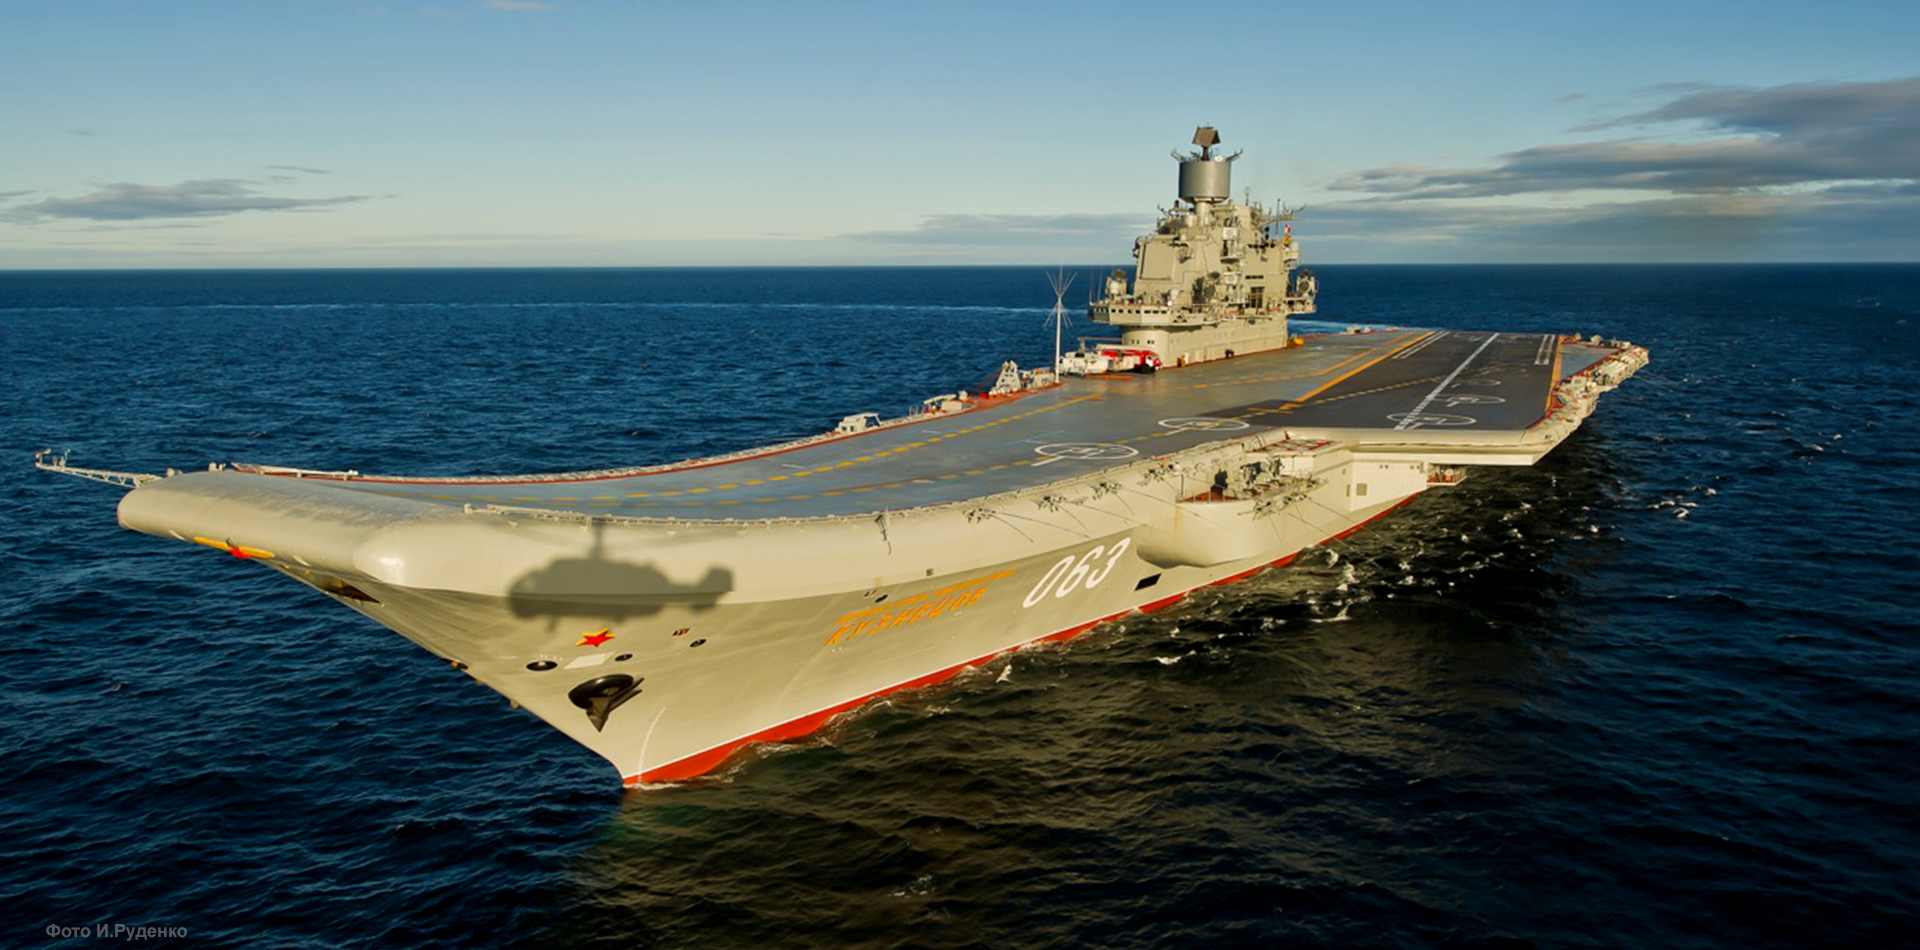 Russia’s Only Aircraft Carrier Admiral Kuznetsov Finally Departs From Its Drydock After Series Of Roadblocks